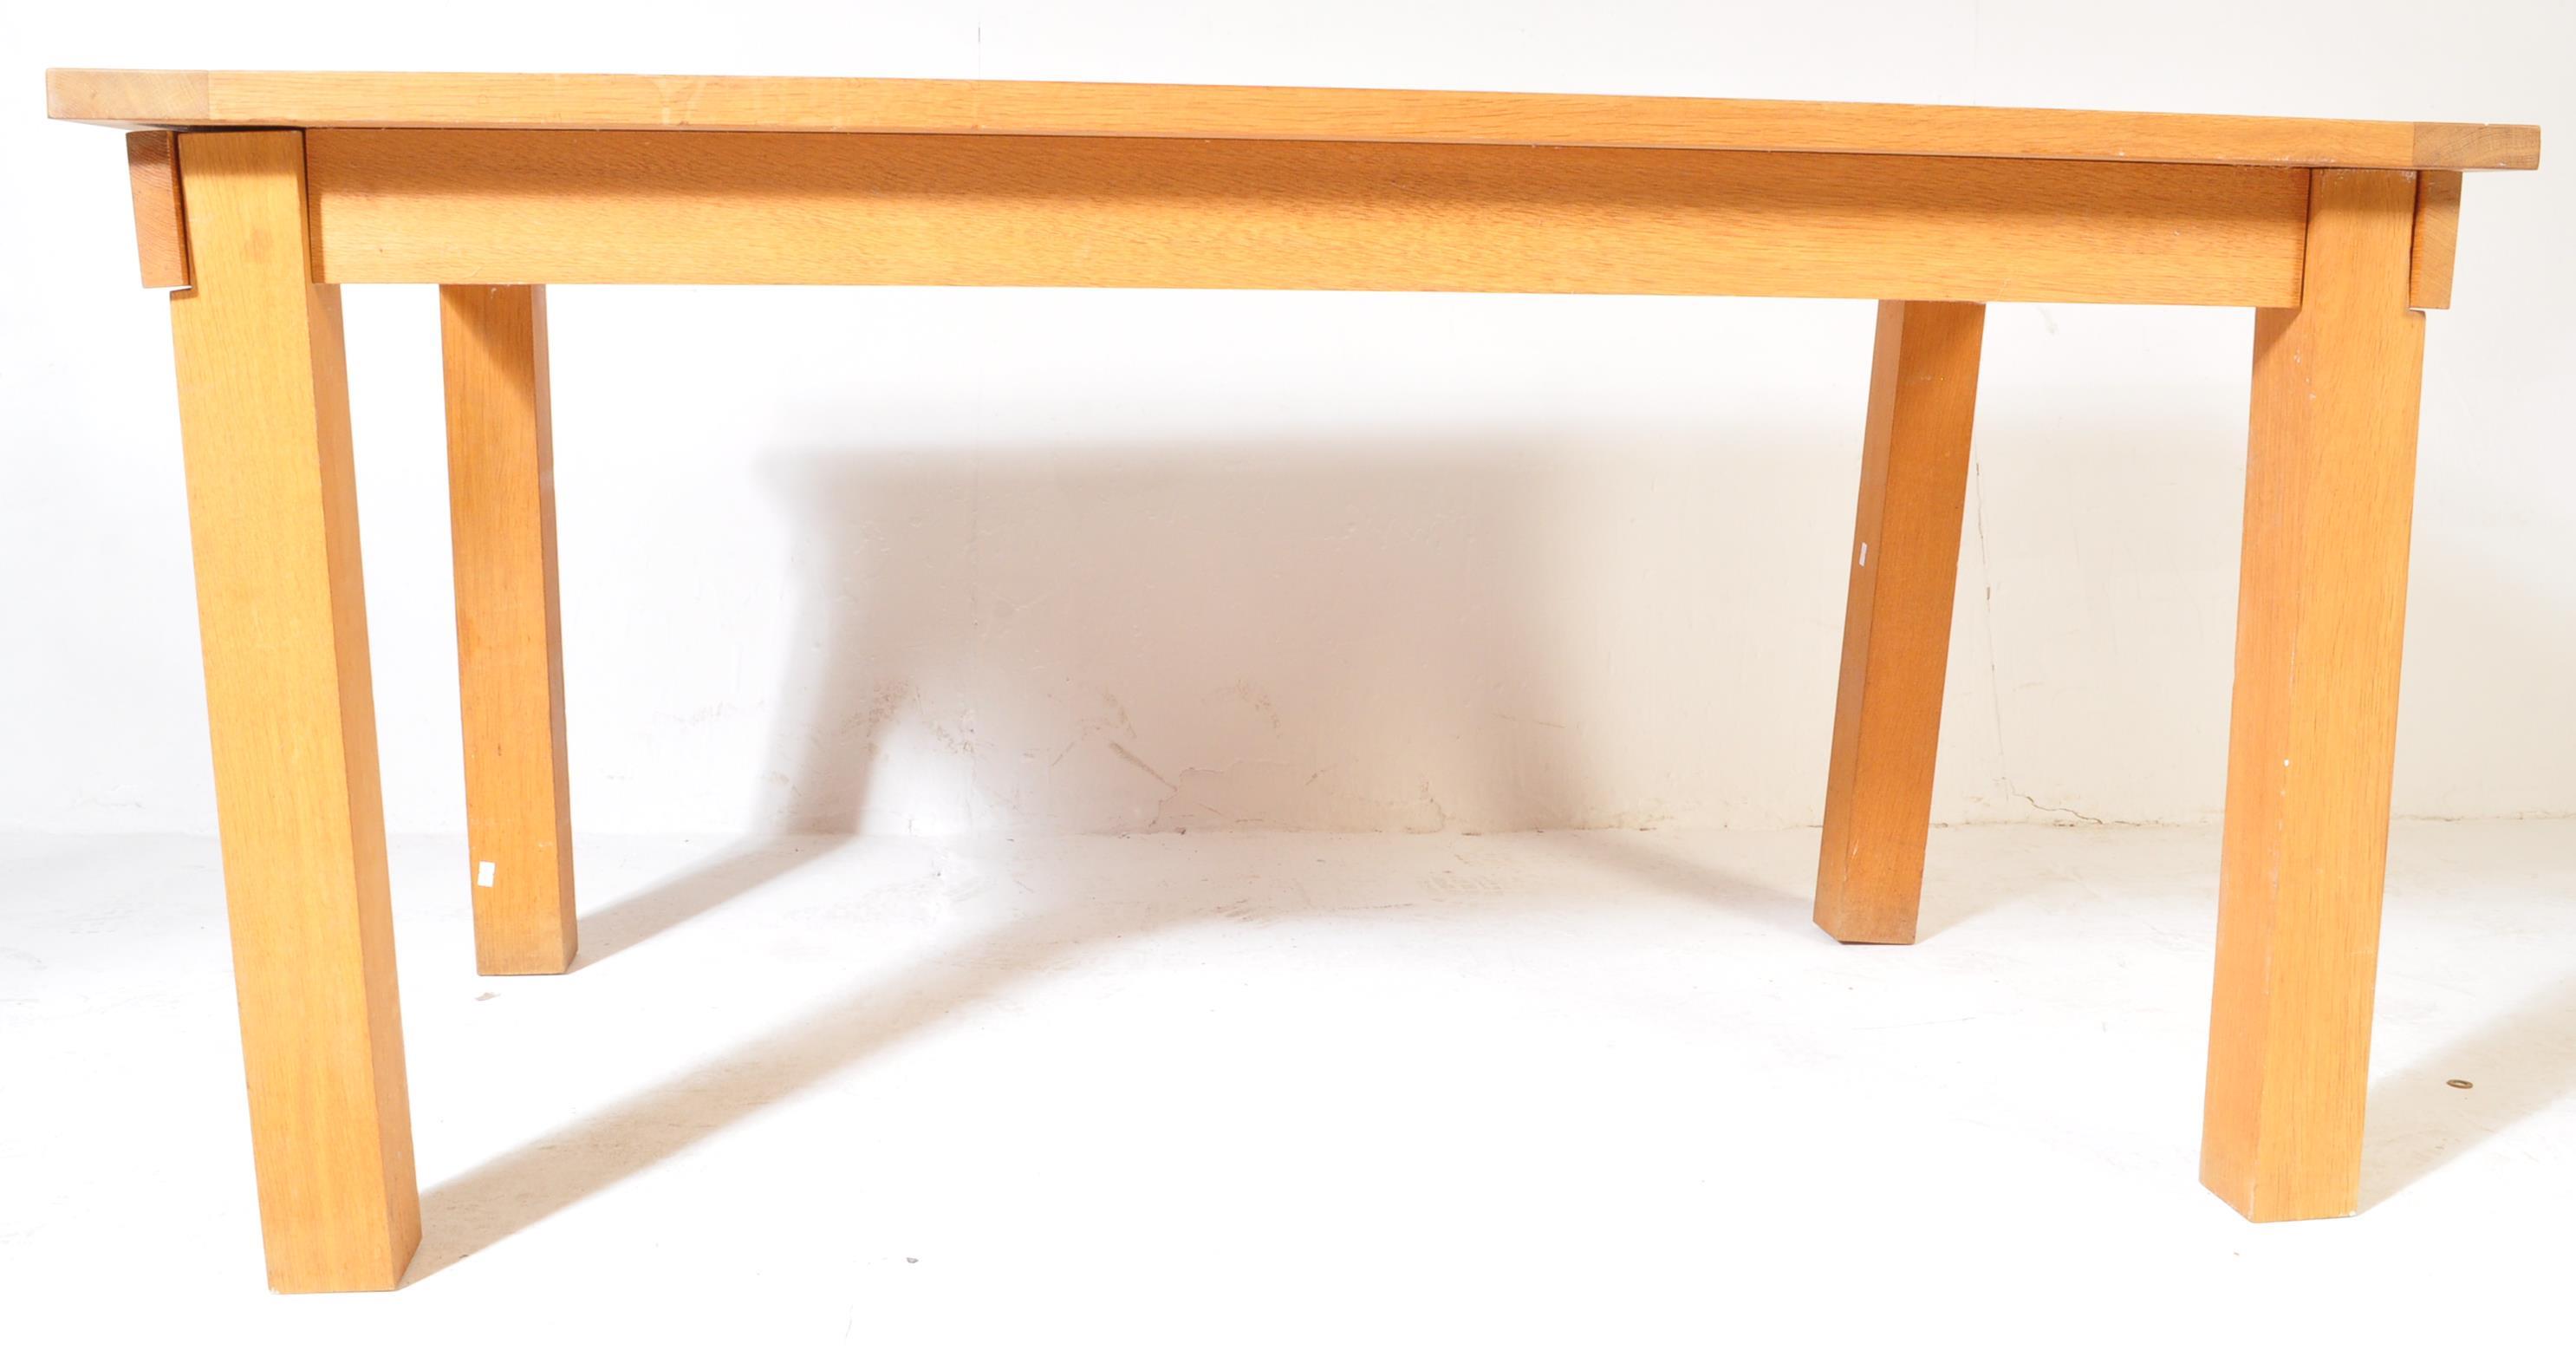 CONTEMPORARY MODERNIST OAK FURNITURE LAND DINING TABLE - Image 3 of 5